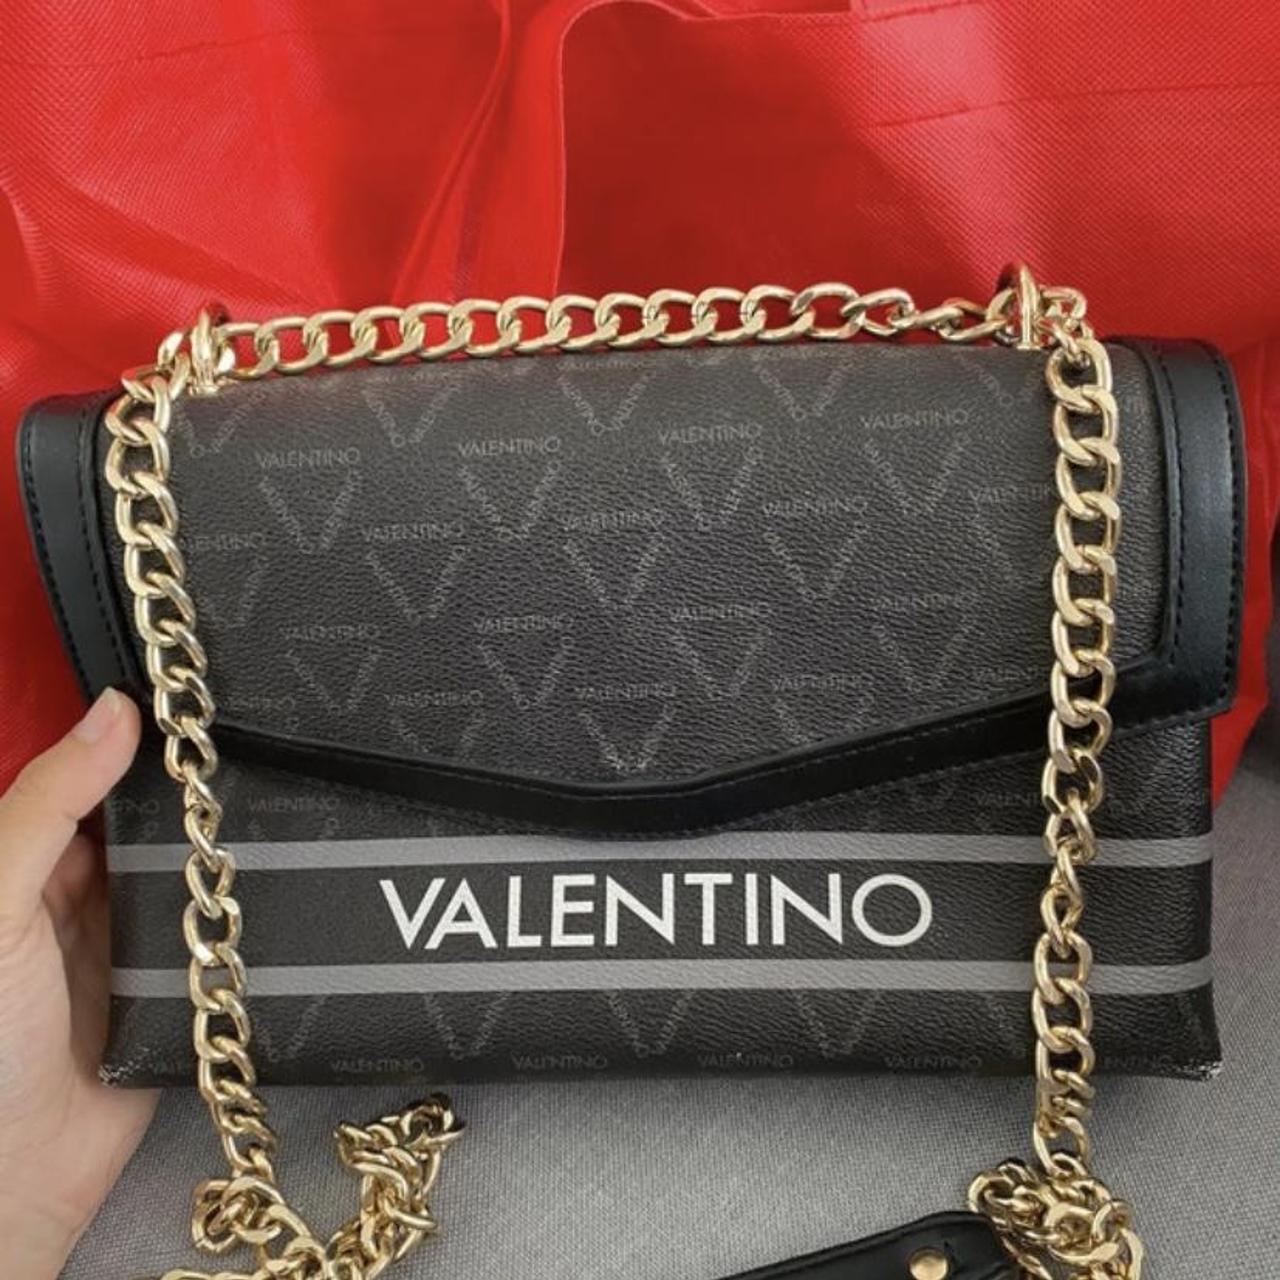 Valentino cross body bag with gold chain strap with... - Depop